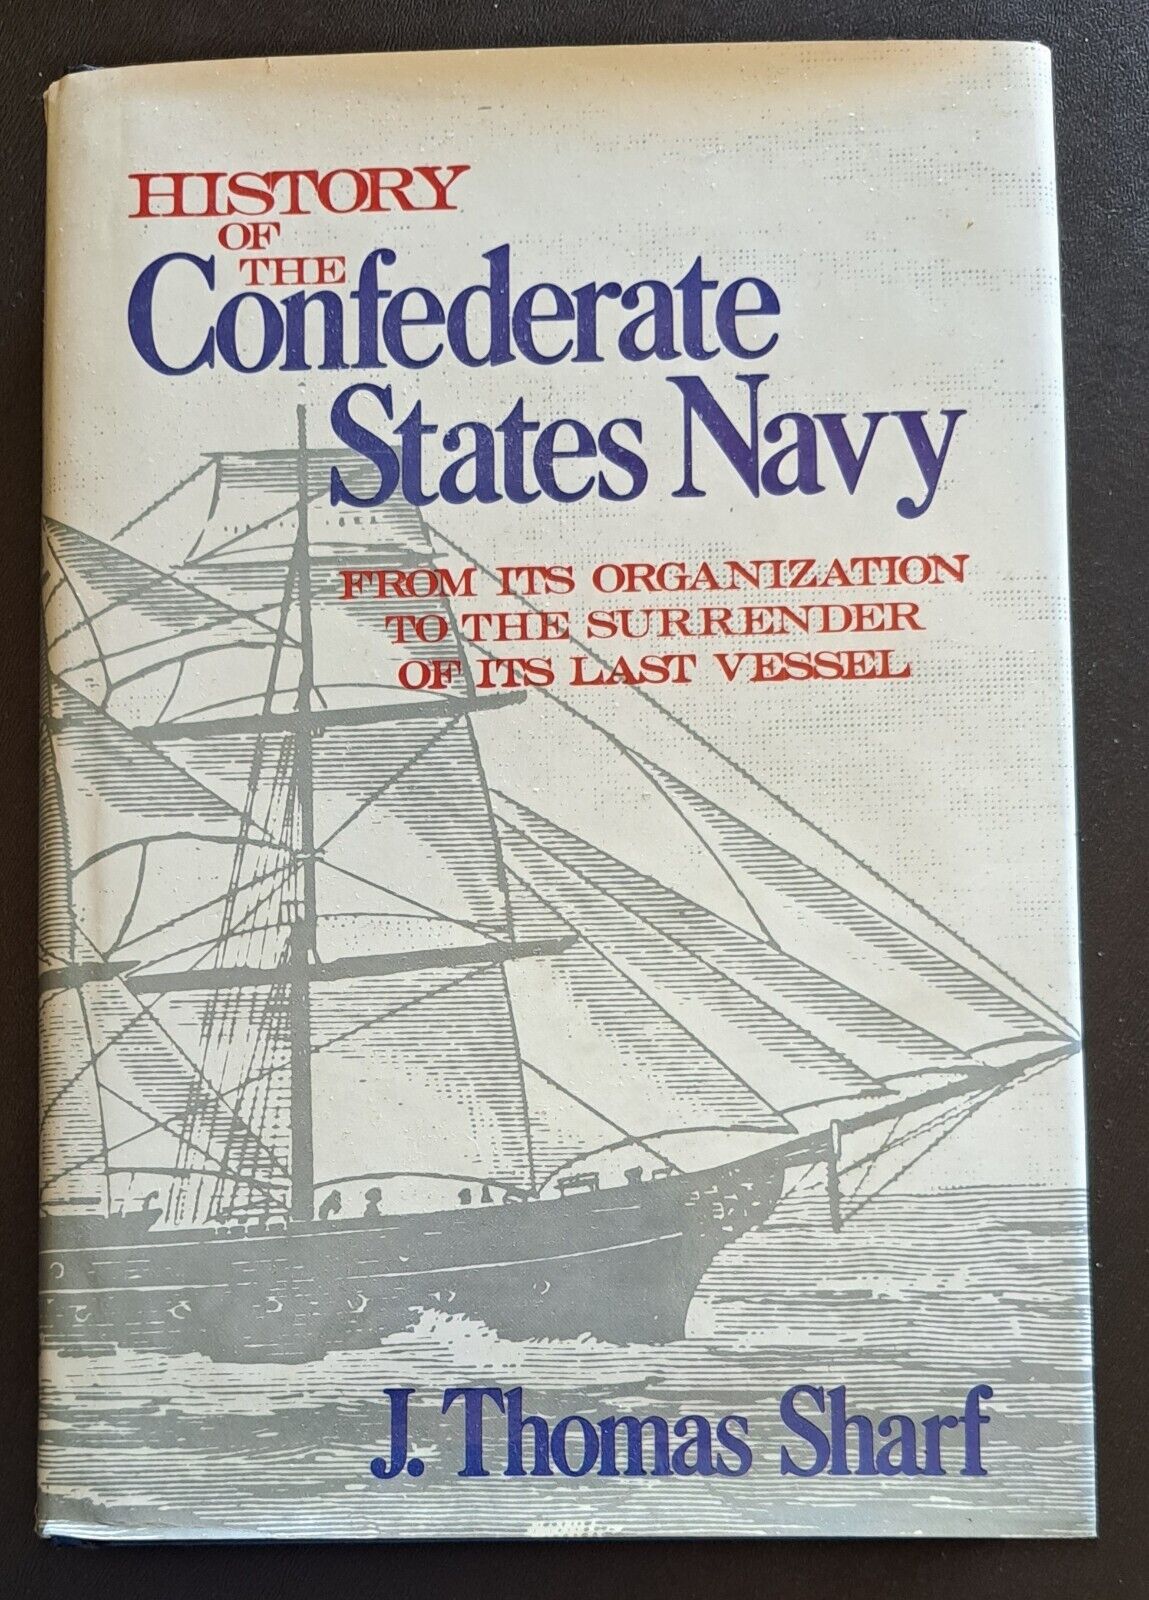 History of the Confederate States Navy by J. Thomas Sharf, publ by Fairfax Press